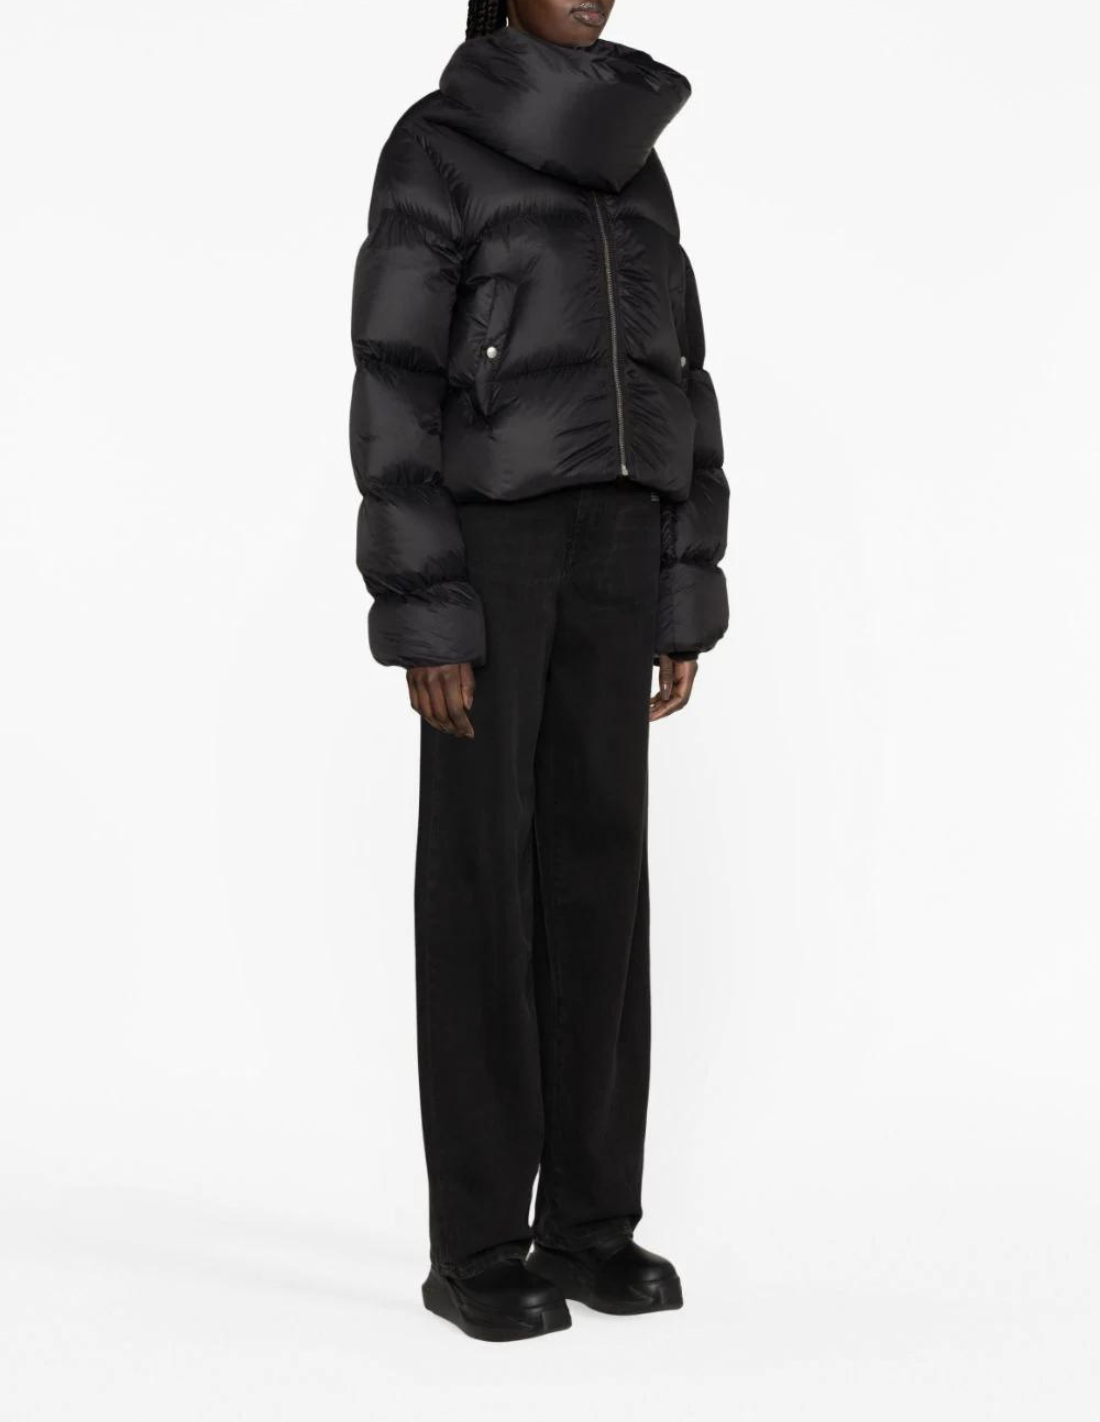 RICK OWENS cropped puffer black jacket with maxi collar - black